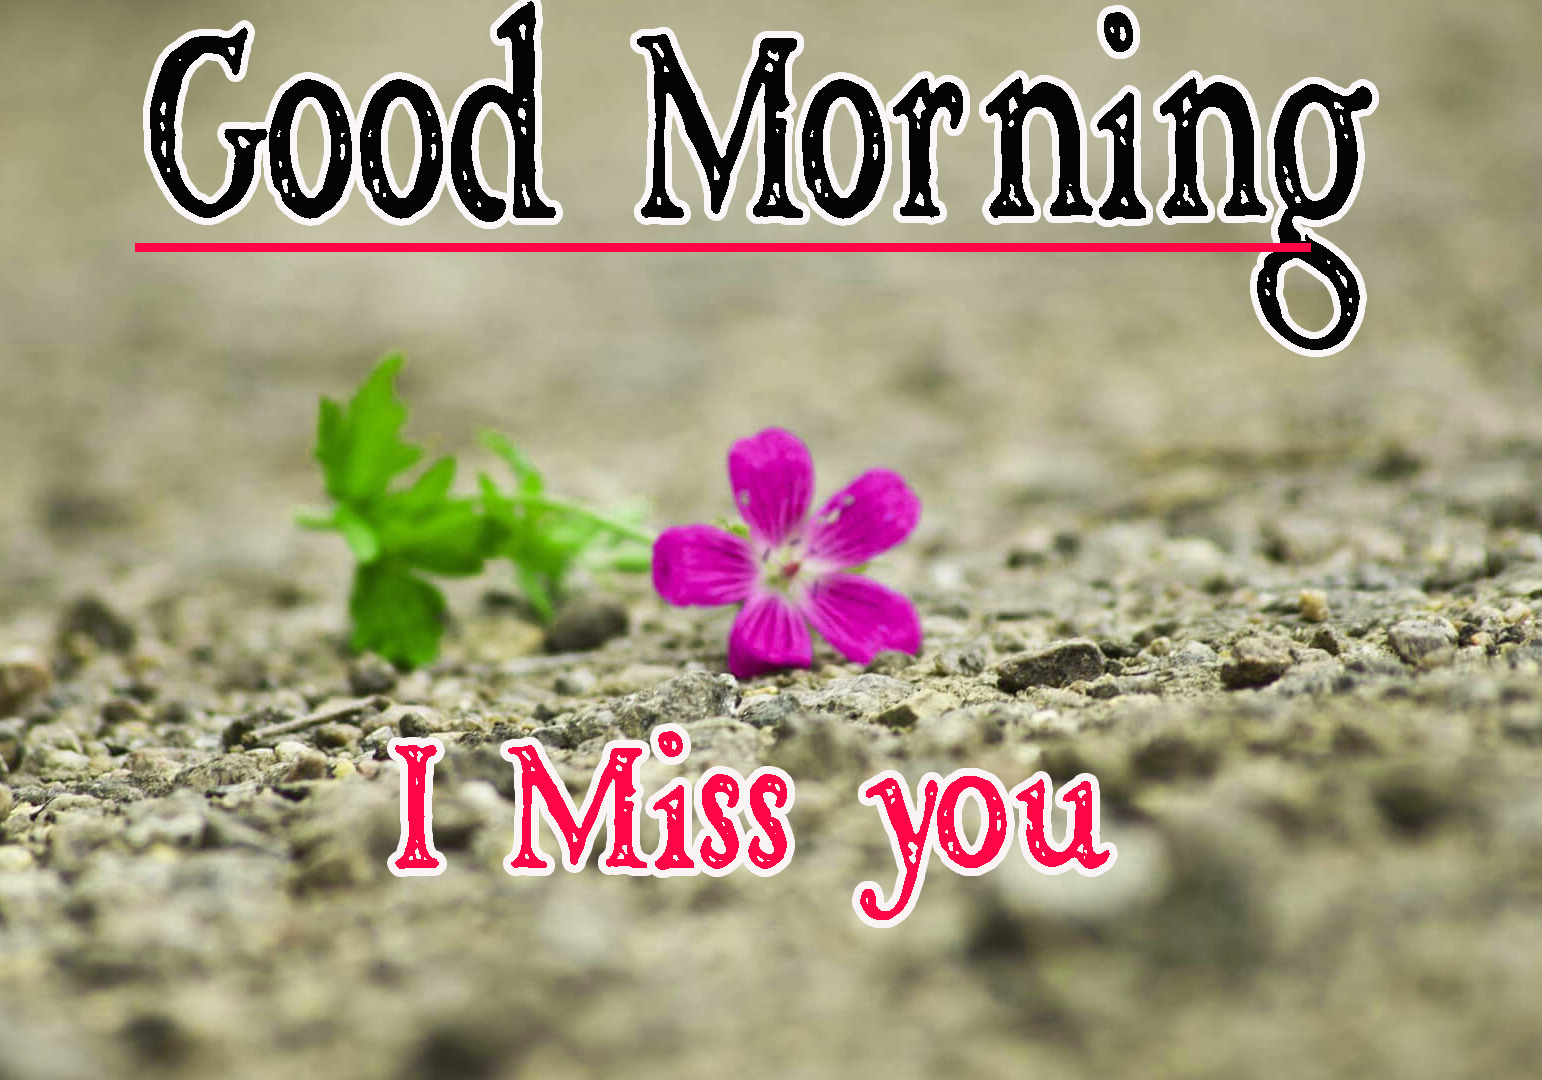 Full HD Special Friend Good Morning Photo Free Download 